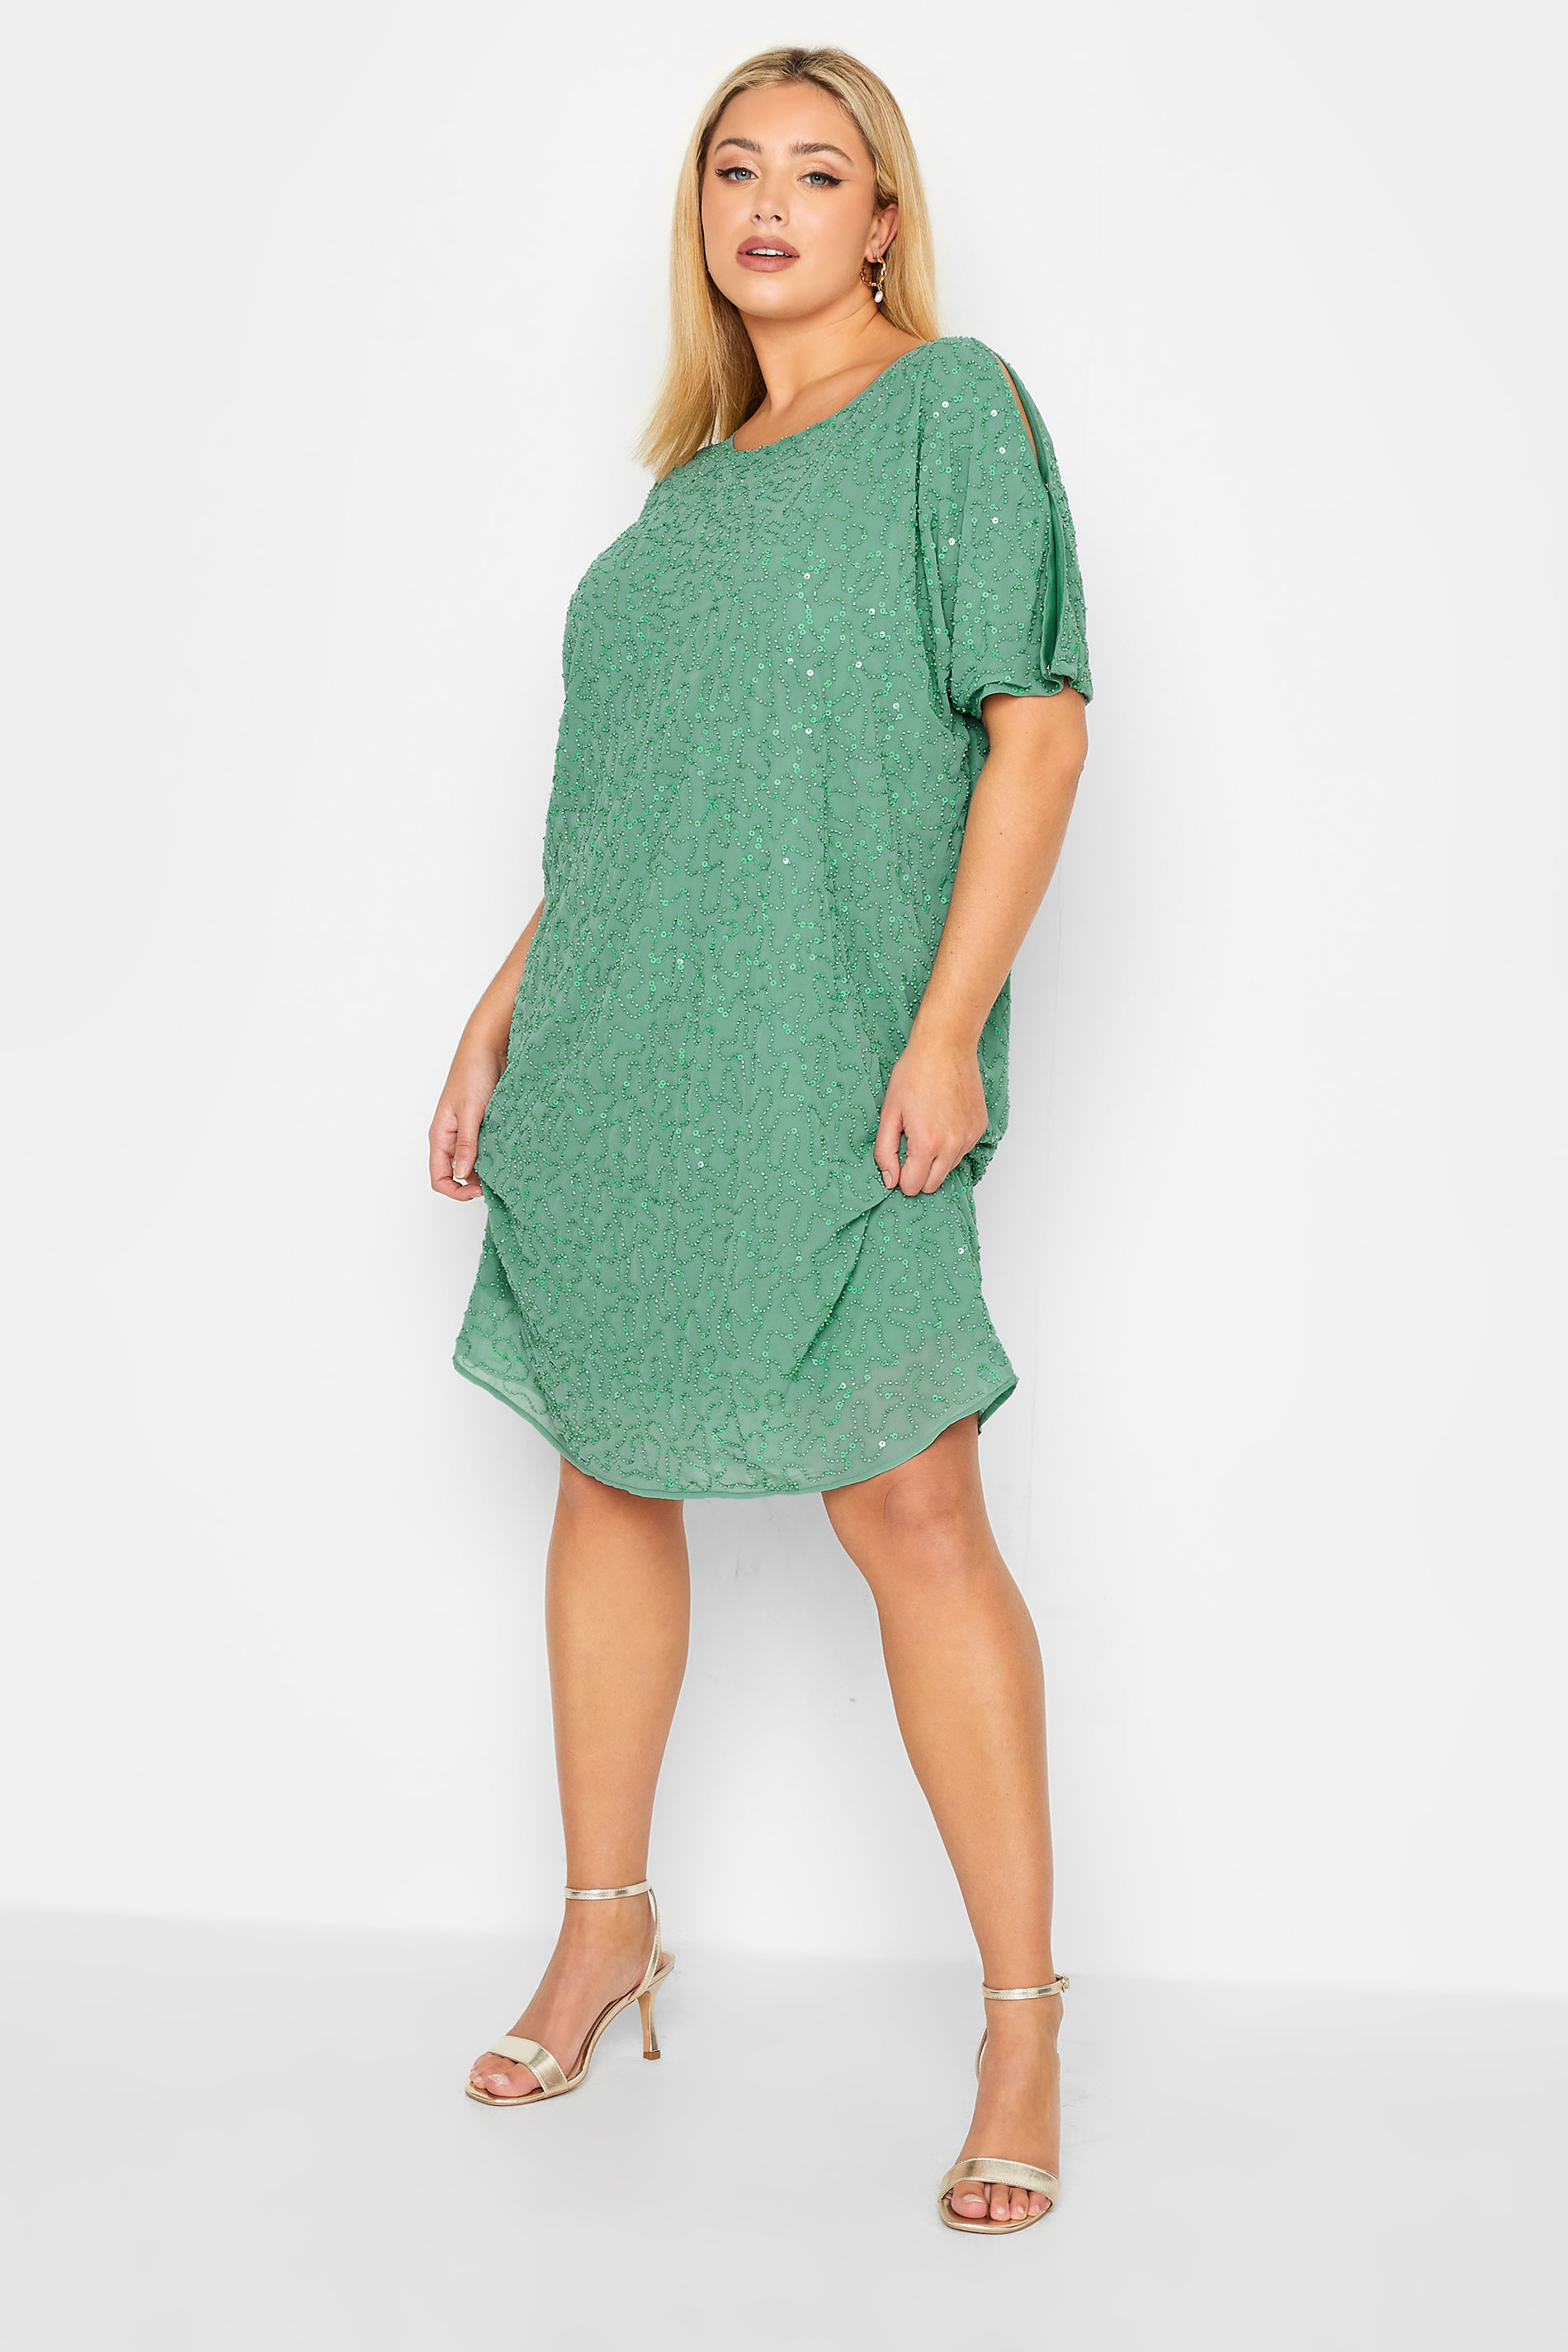 LUXE Plus Size Green Sequin Hand Embellished Cape Dress | Yours Clothing 2